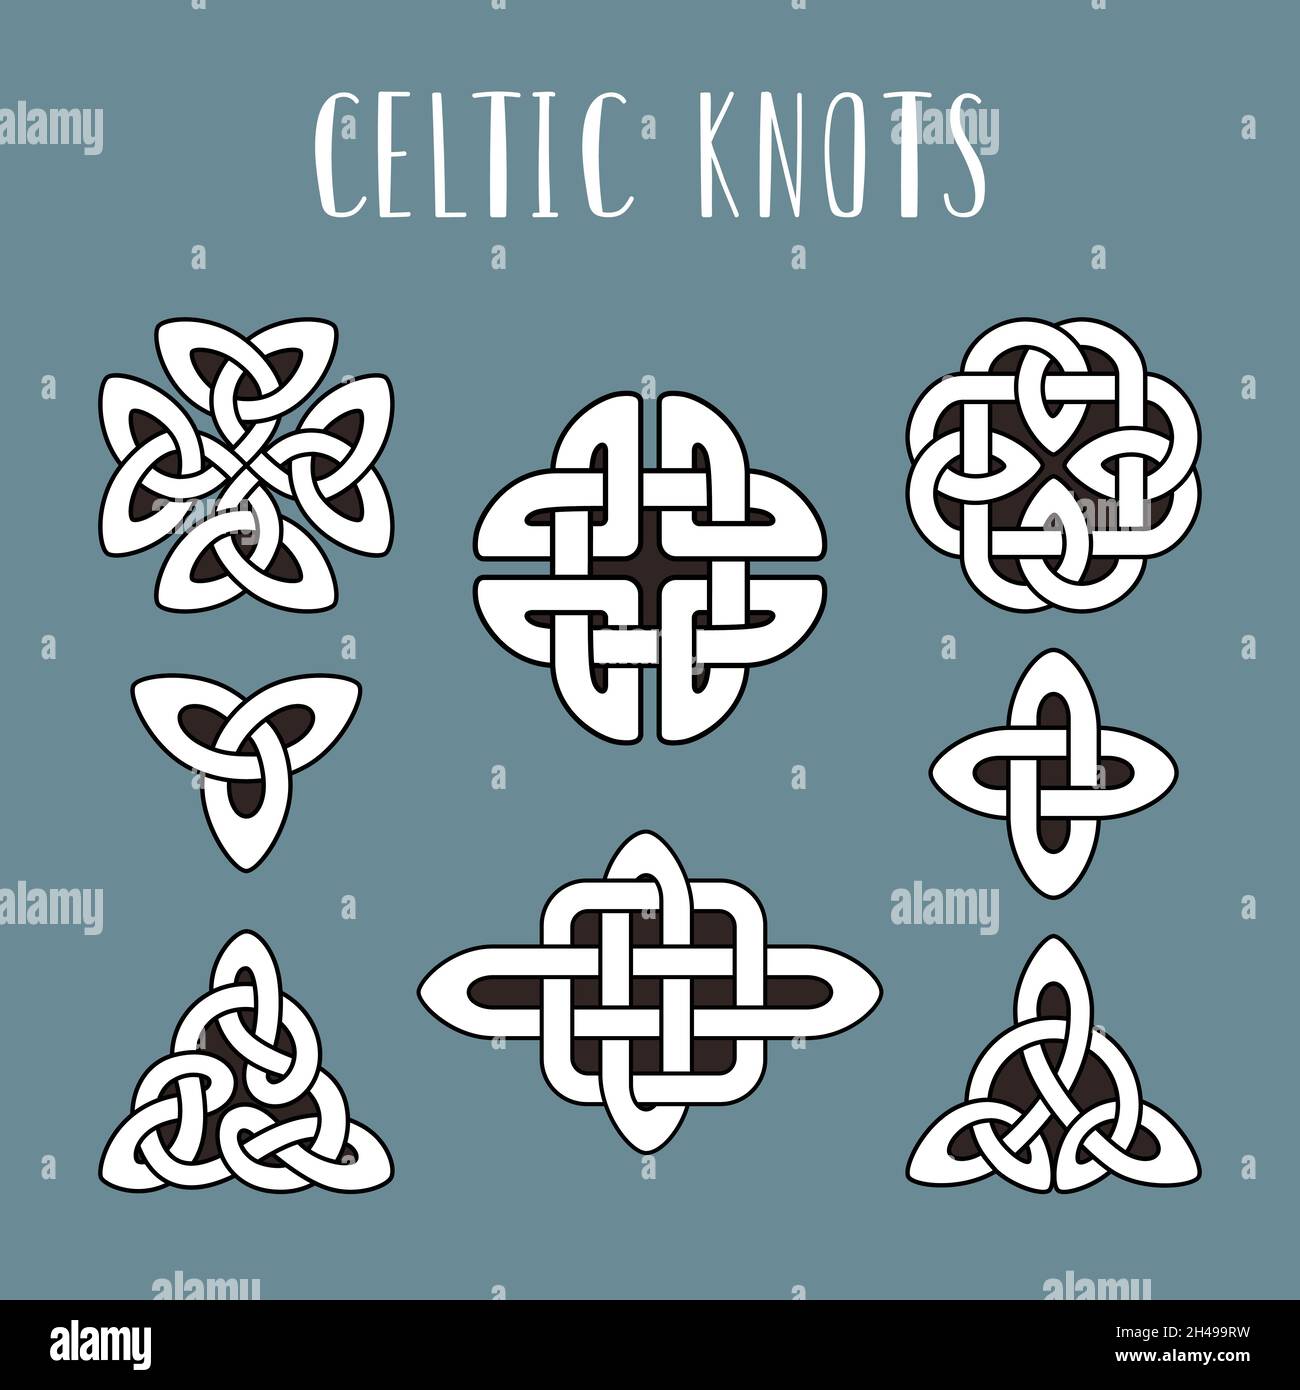 Celtic knots. Beautiful celtics knot symbols, eternal trinity trefoil unity energy interconnected knotted icons isolated on color background, tribal irish celt loops vector signes illustration Stock Vector